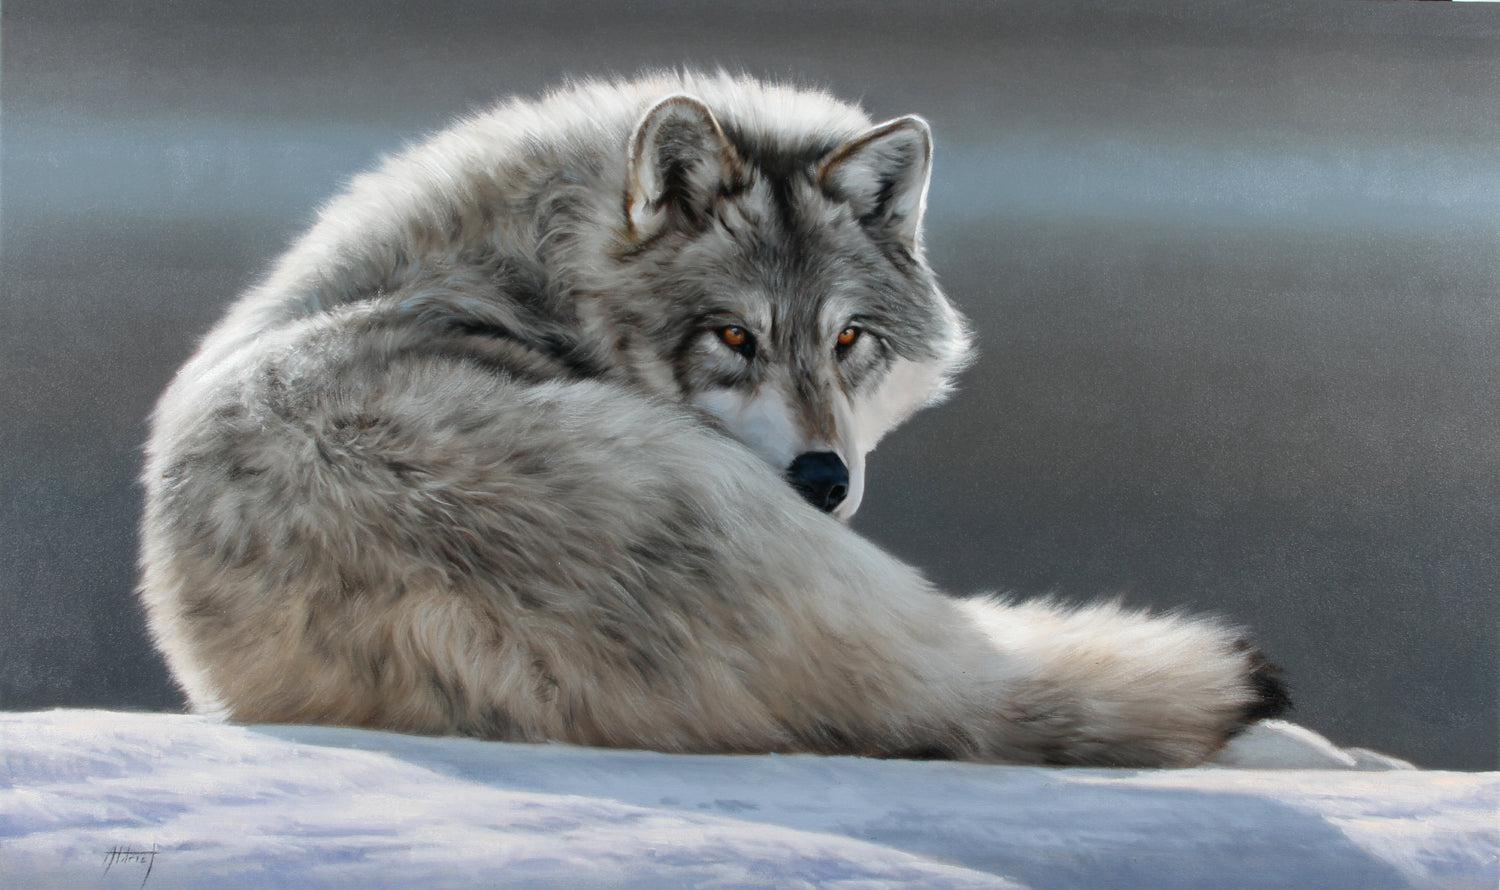 Cold Stare-Painting-Edward Aldrich-Sorrel Sky Gallery